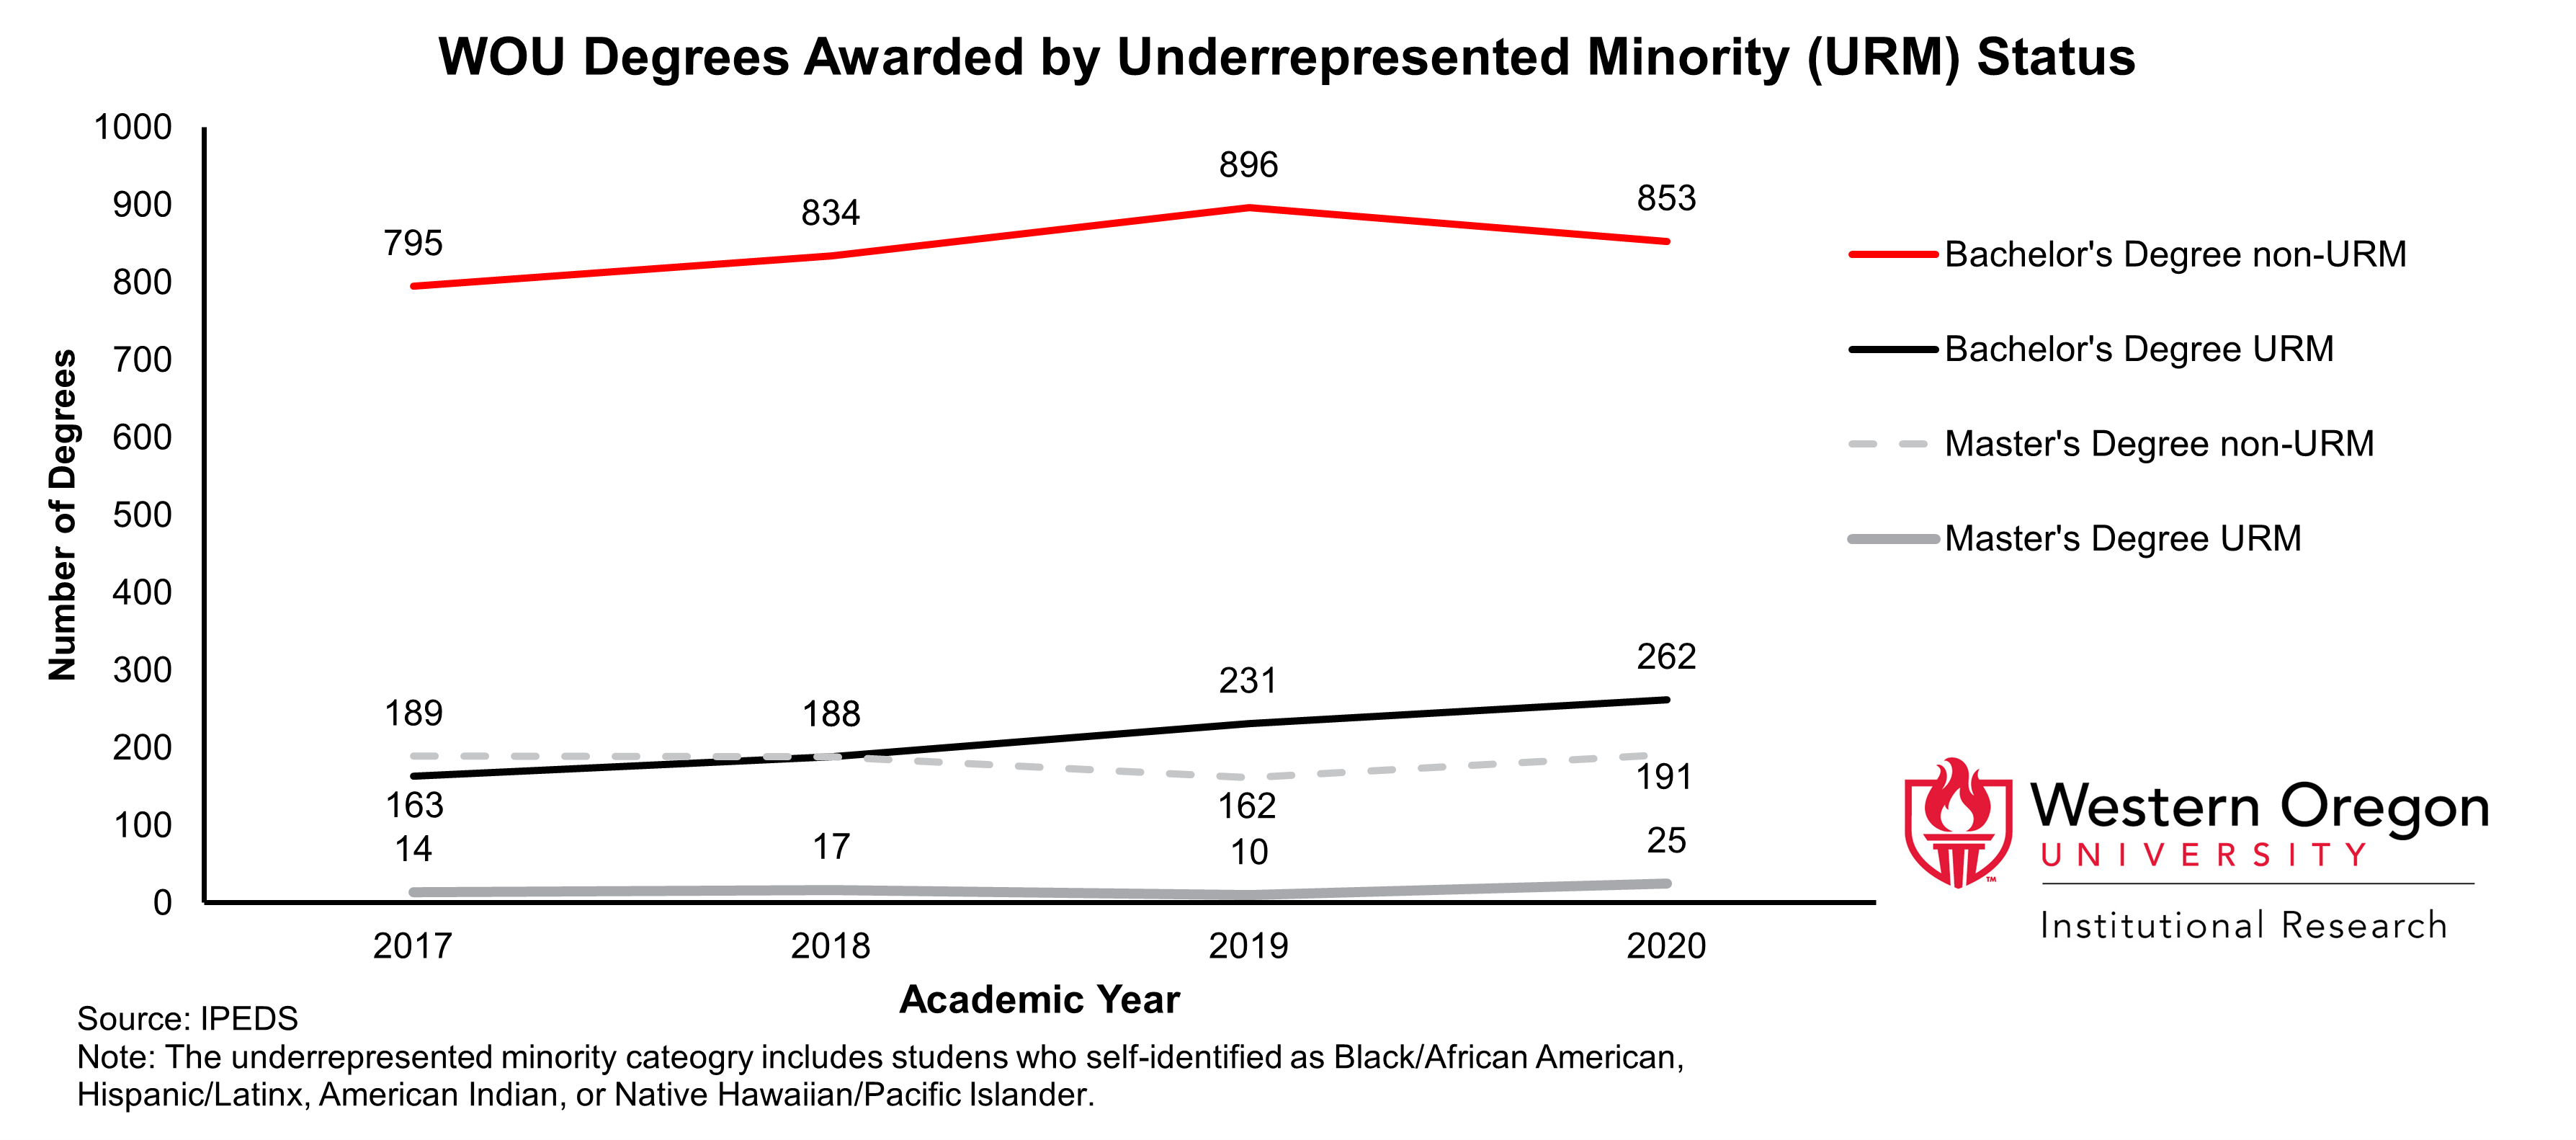 Line graph of the total number of Bachelor's and Master's degrees awarded at WOU between 2017 and 2020, broken out by Underrepresented Minority status , showing that the number of degrees awarded to students from underrepresented minority groups has been steadily increasing since 2017